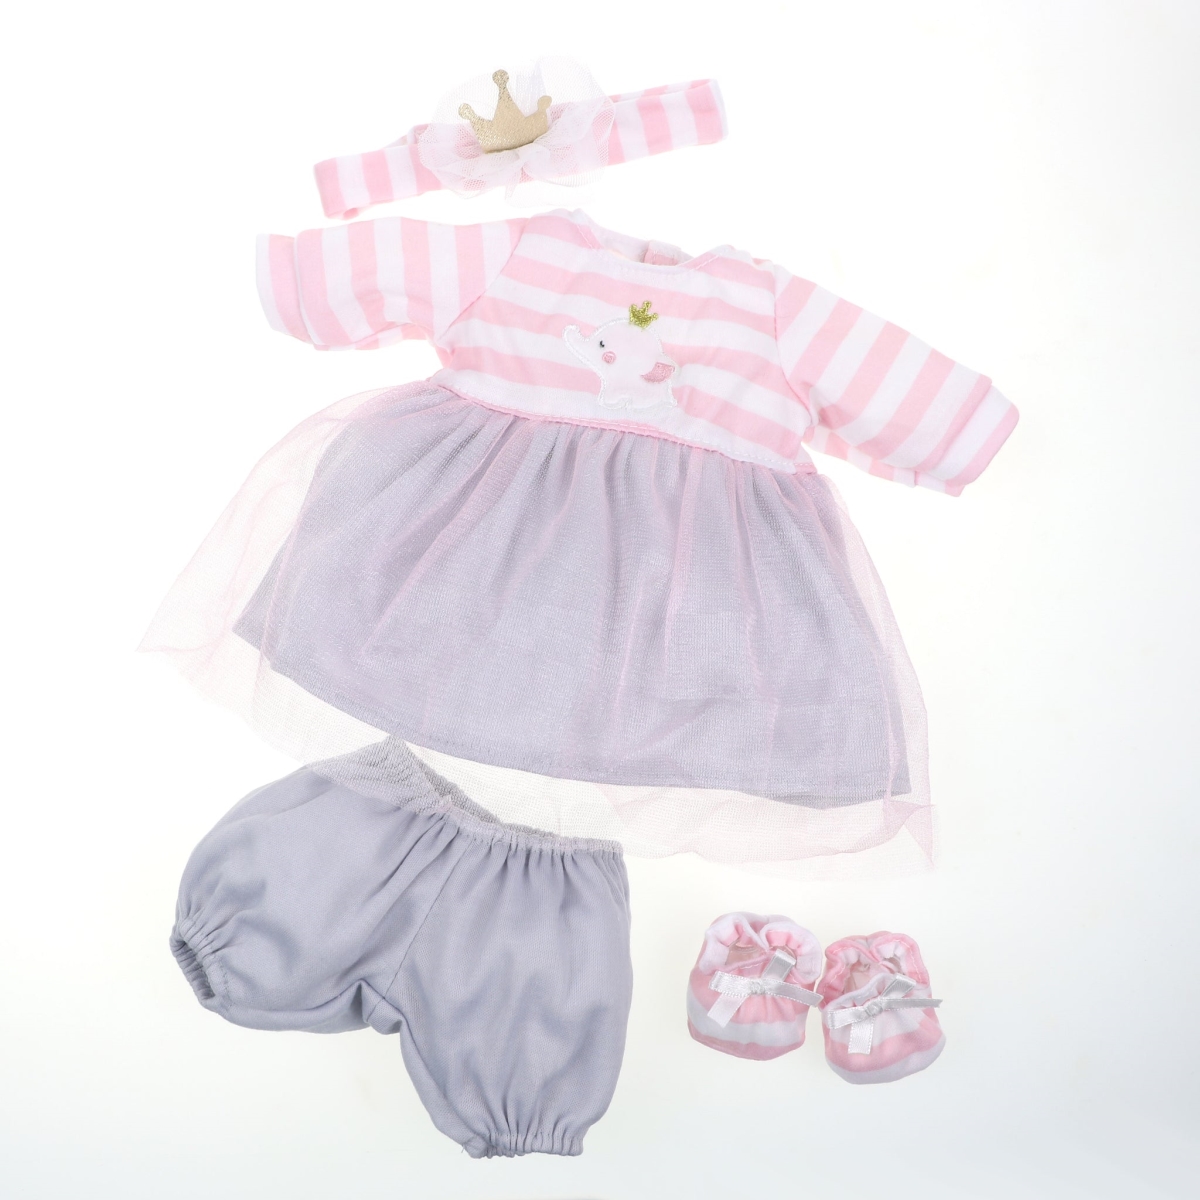 Picture of Berenguer Boutique CLO30040G 14 - 18 in. Baby Doll Outfit, Pink